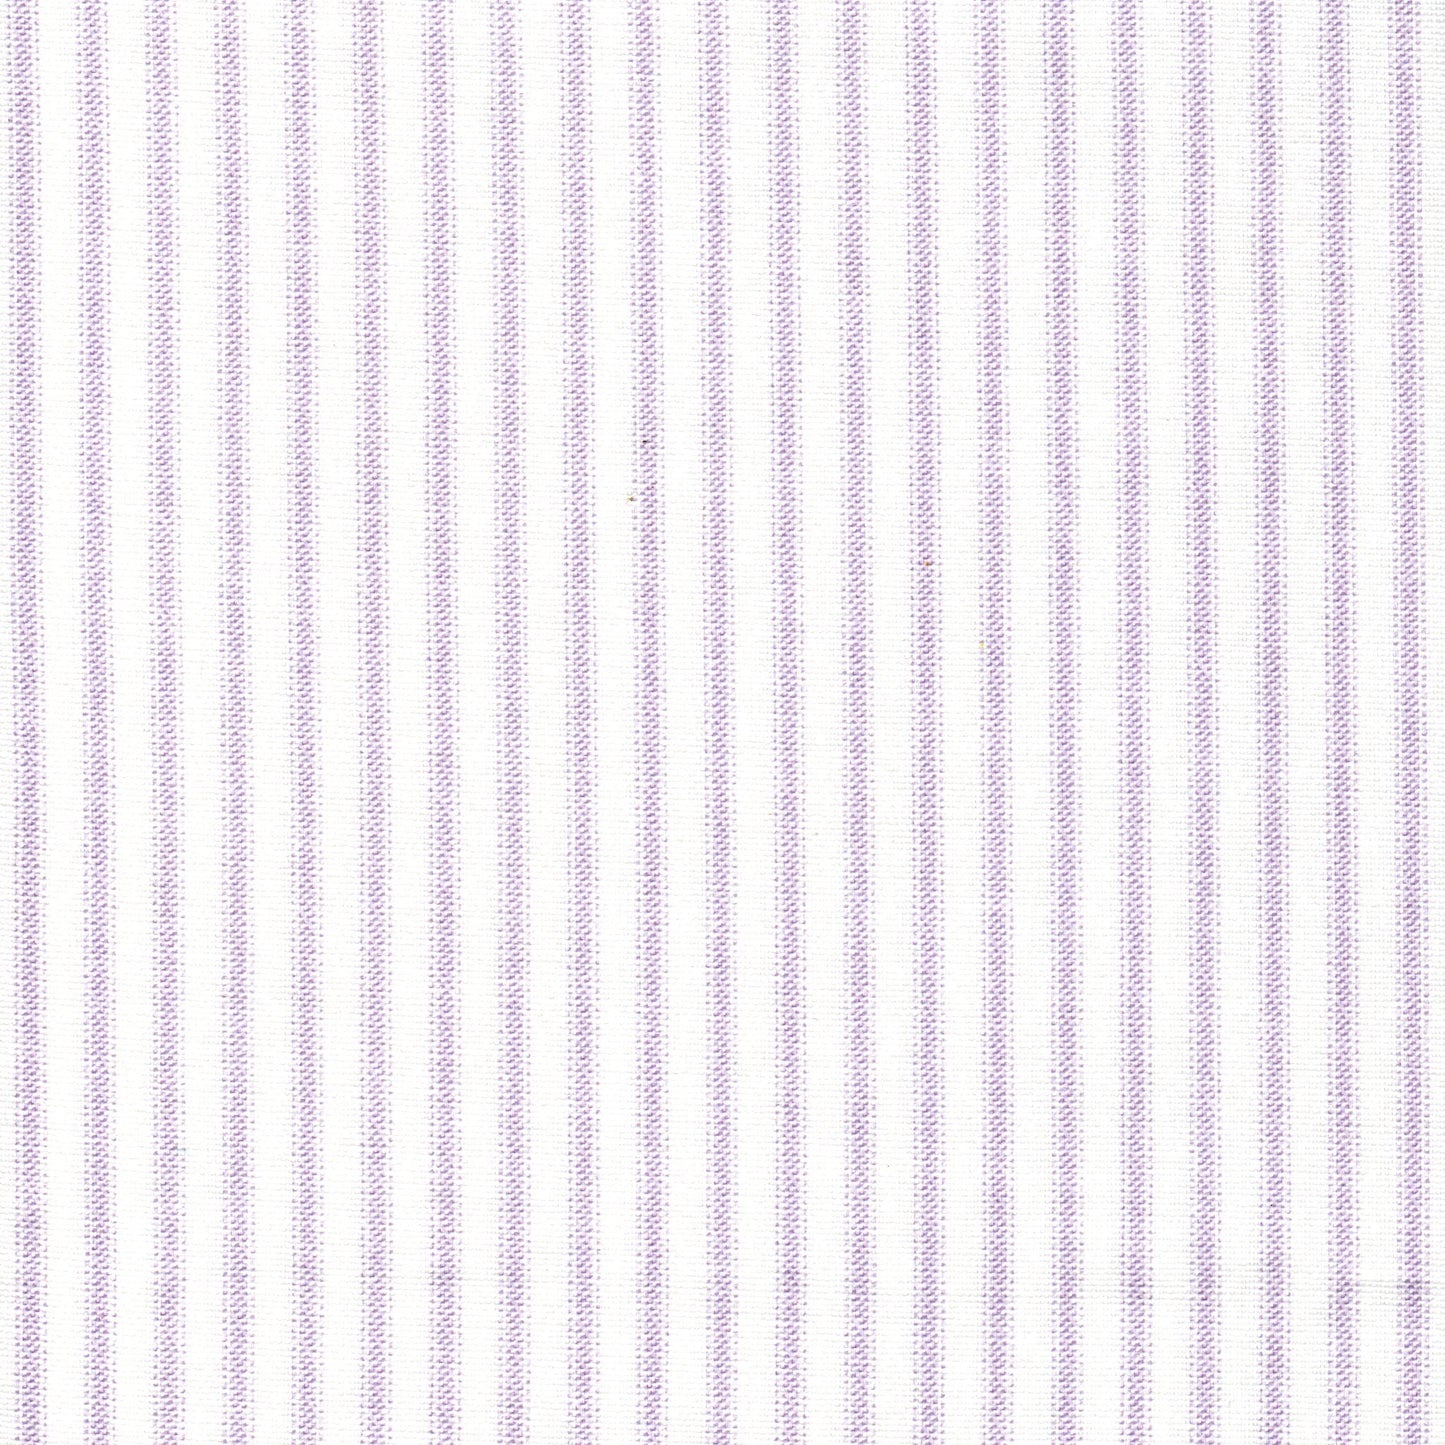 Tailored Bedskirt in Classic Orchid Lavender Ticking Stripe on White